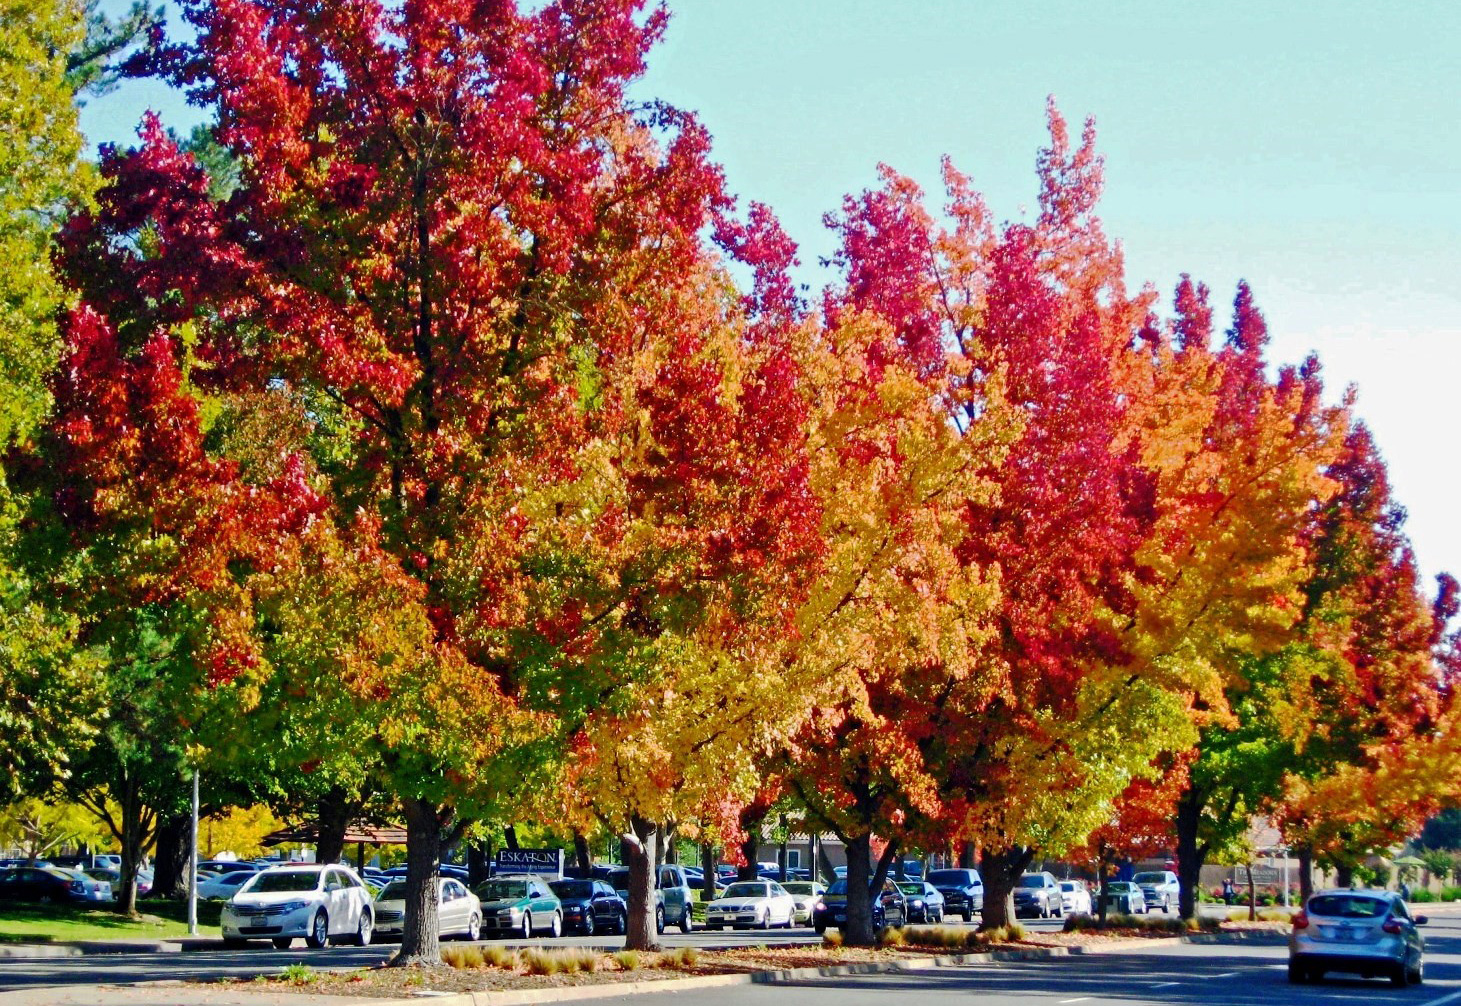 Things to do on a budget in Sacramento this Fall